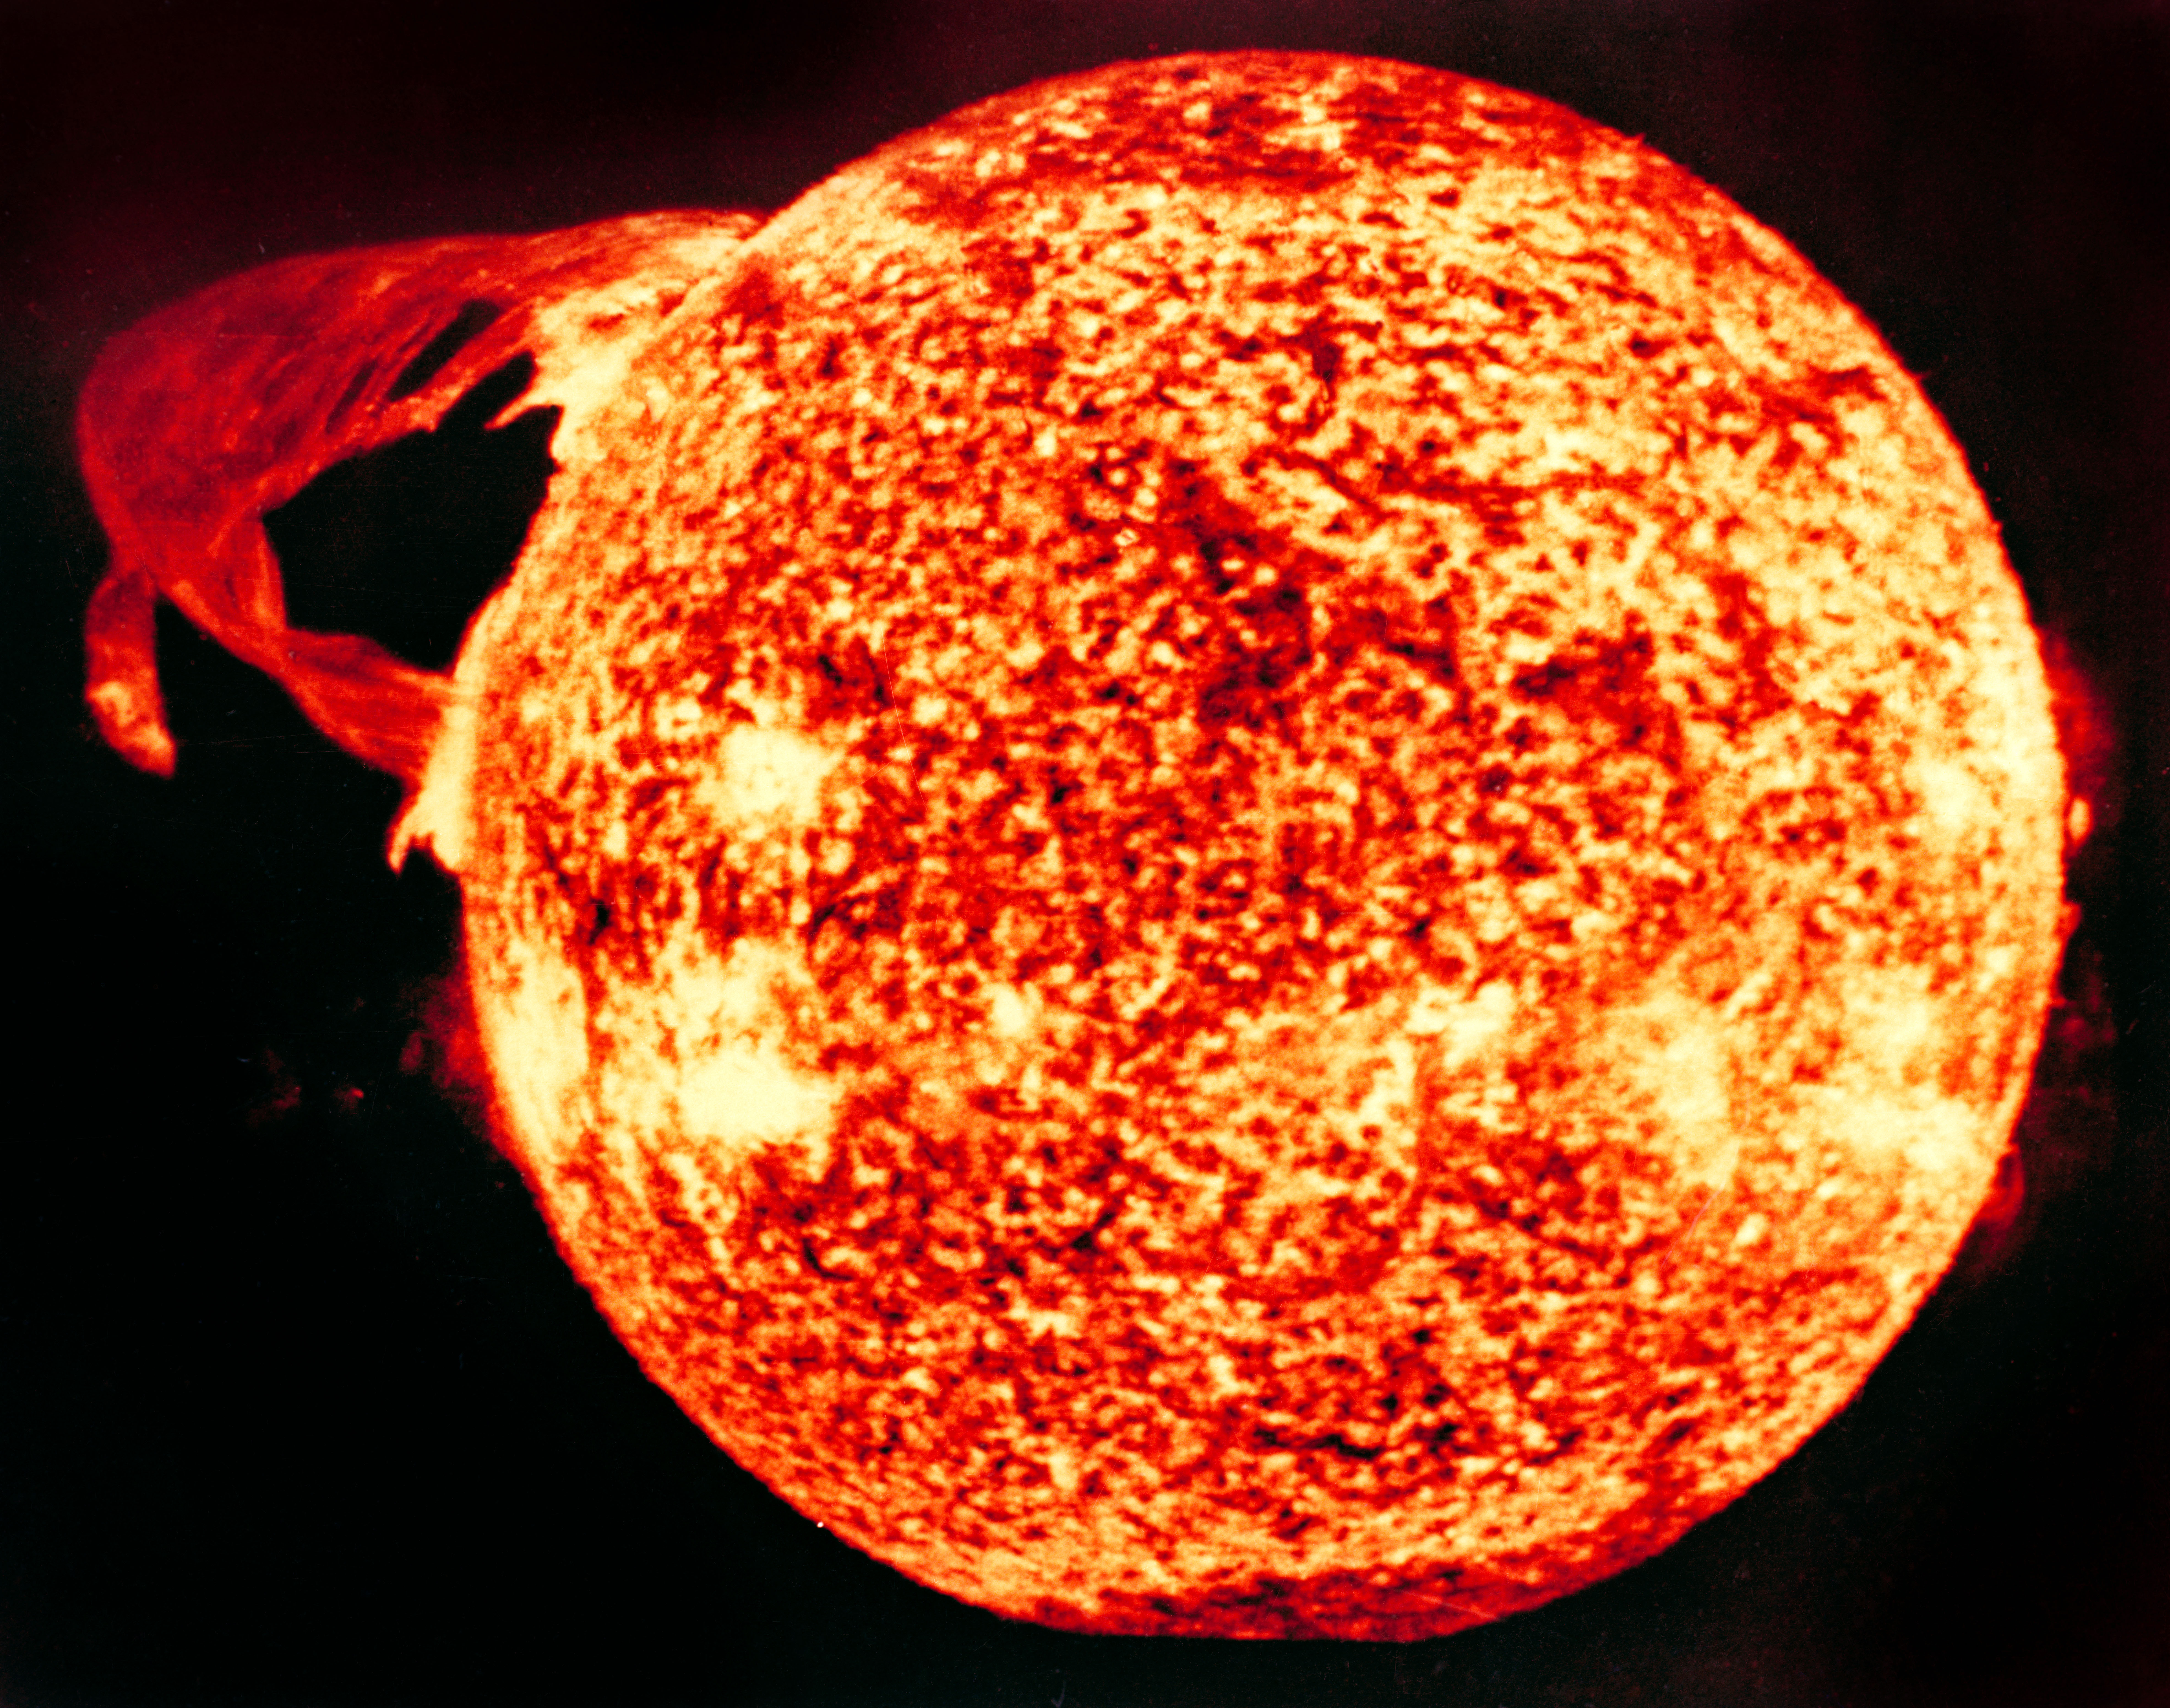 Image of a massive solar flare taken by one of the Apollo Telescope Mount instruments